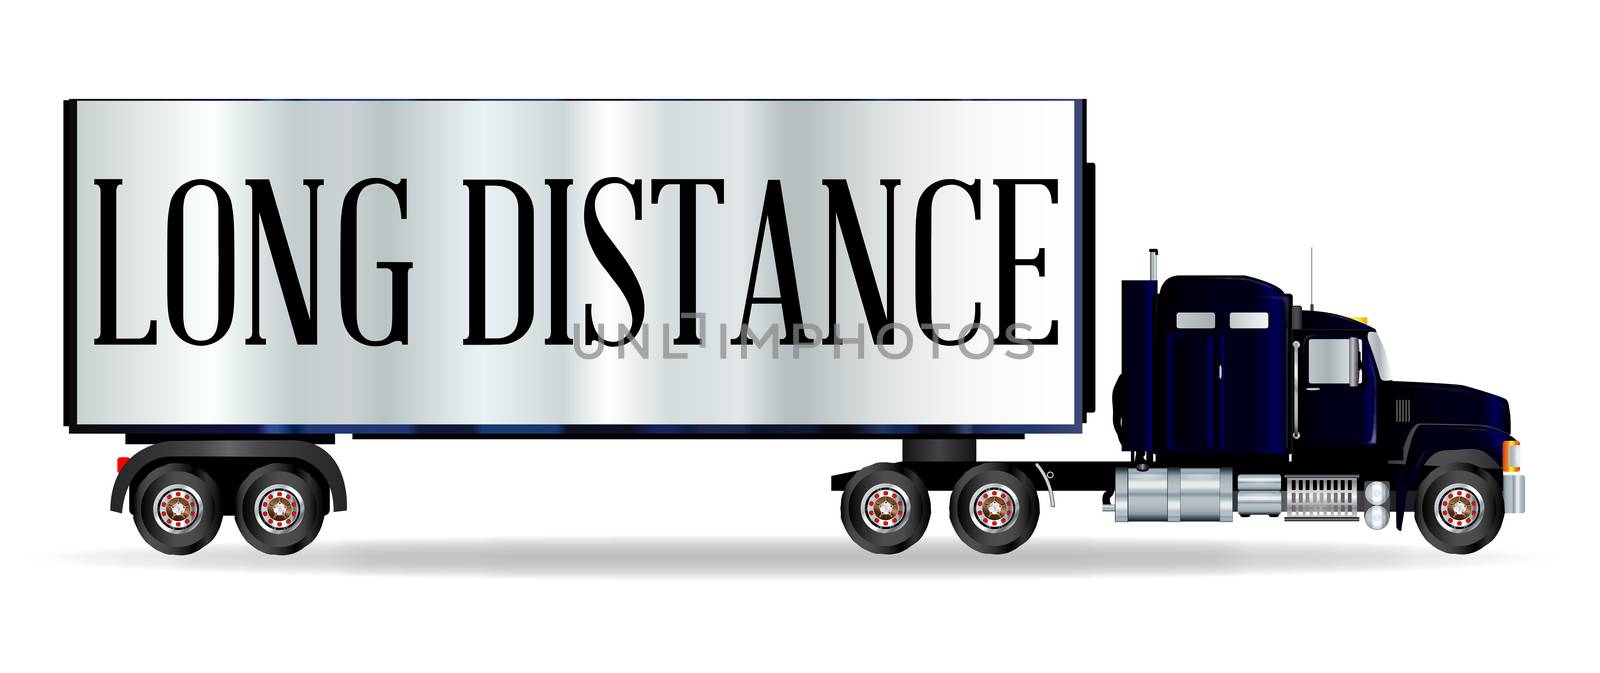 The front end of a large lorry over a white background with Long Distance inscription